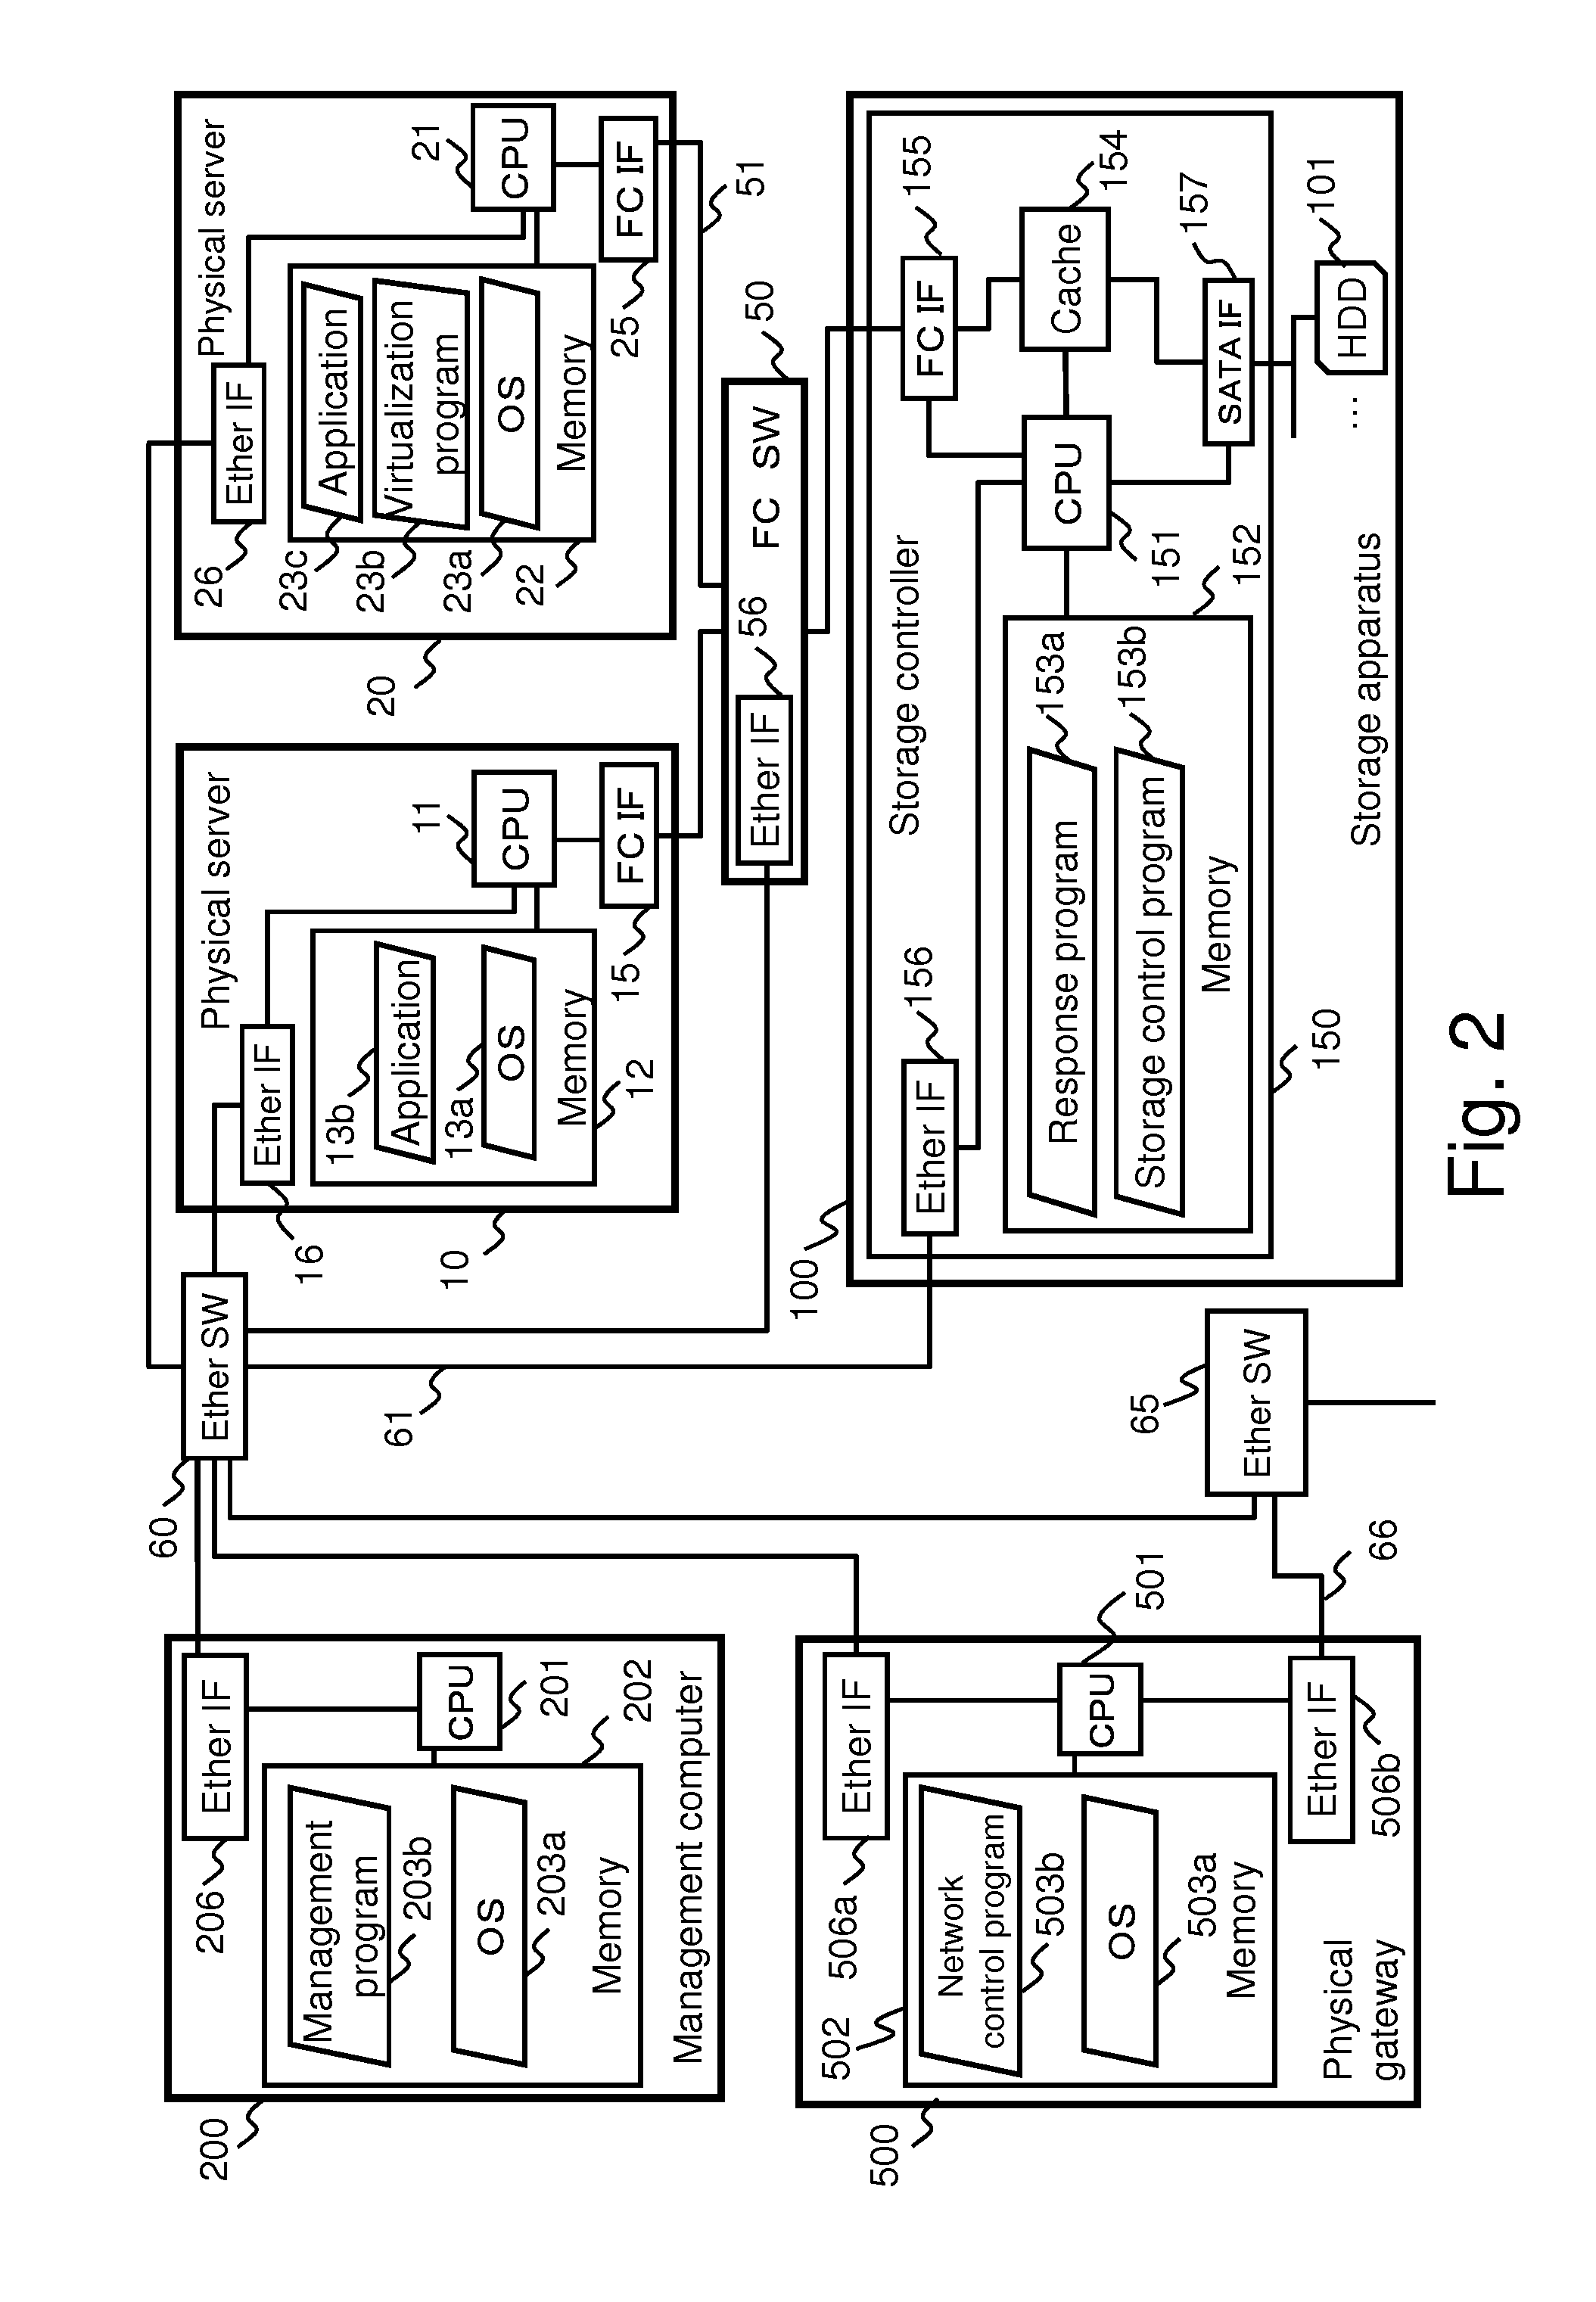 Method of managing tenant network configuration in environment where virtual server and non-virtual server coexist